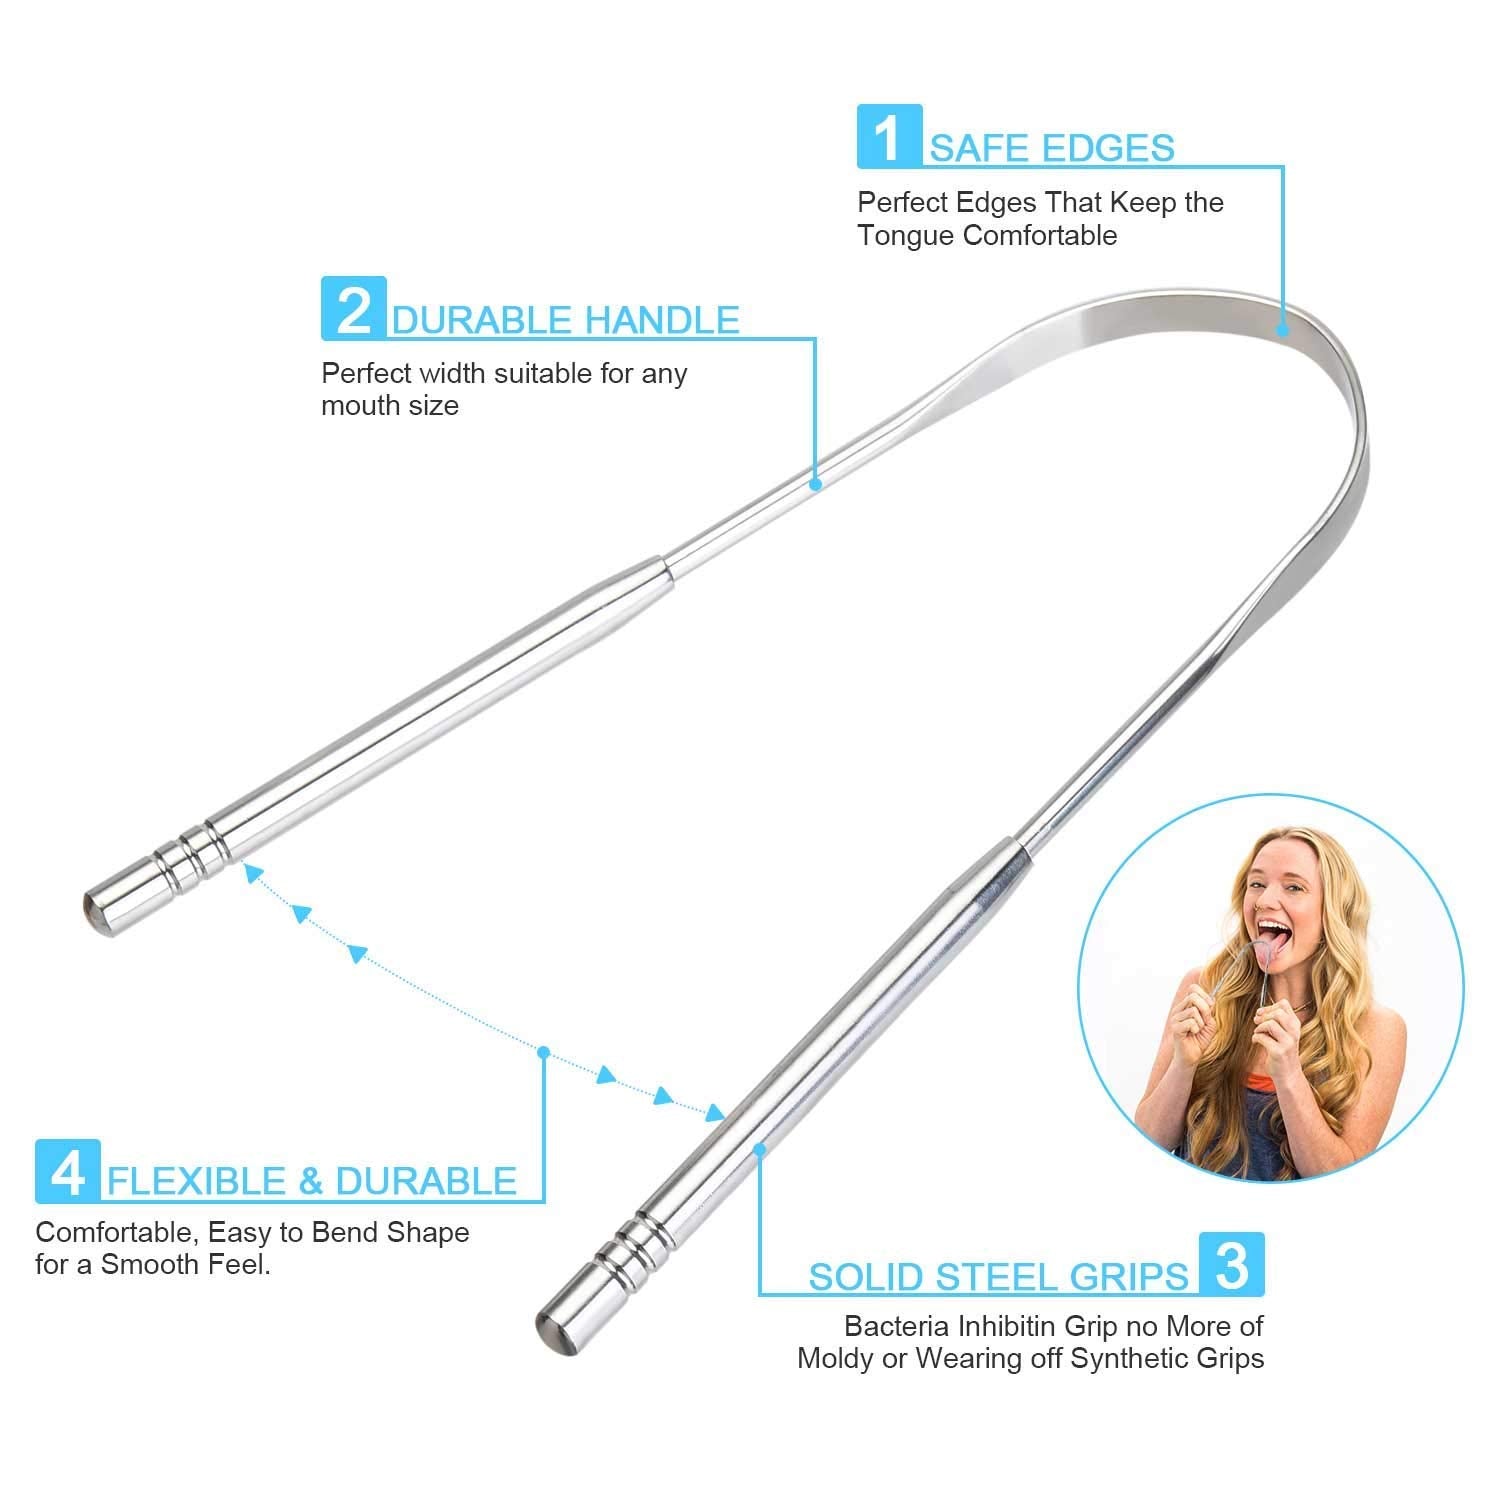 NJ Tongue Cleaner with solid handle, 304 Medical Grade Stainless Steel, Stainless Steel Tongue Cleaner for Both Adult and Kids, Professional Eliminate Bad Breath, Help Your Oral Hygiene: 1 Pc.